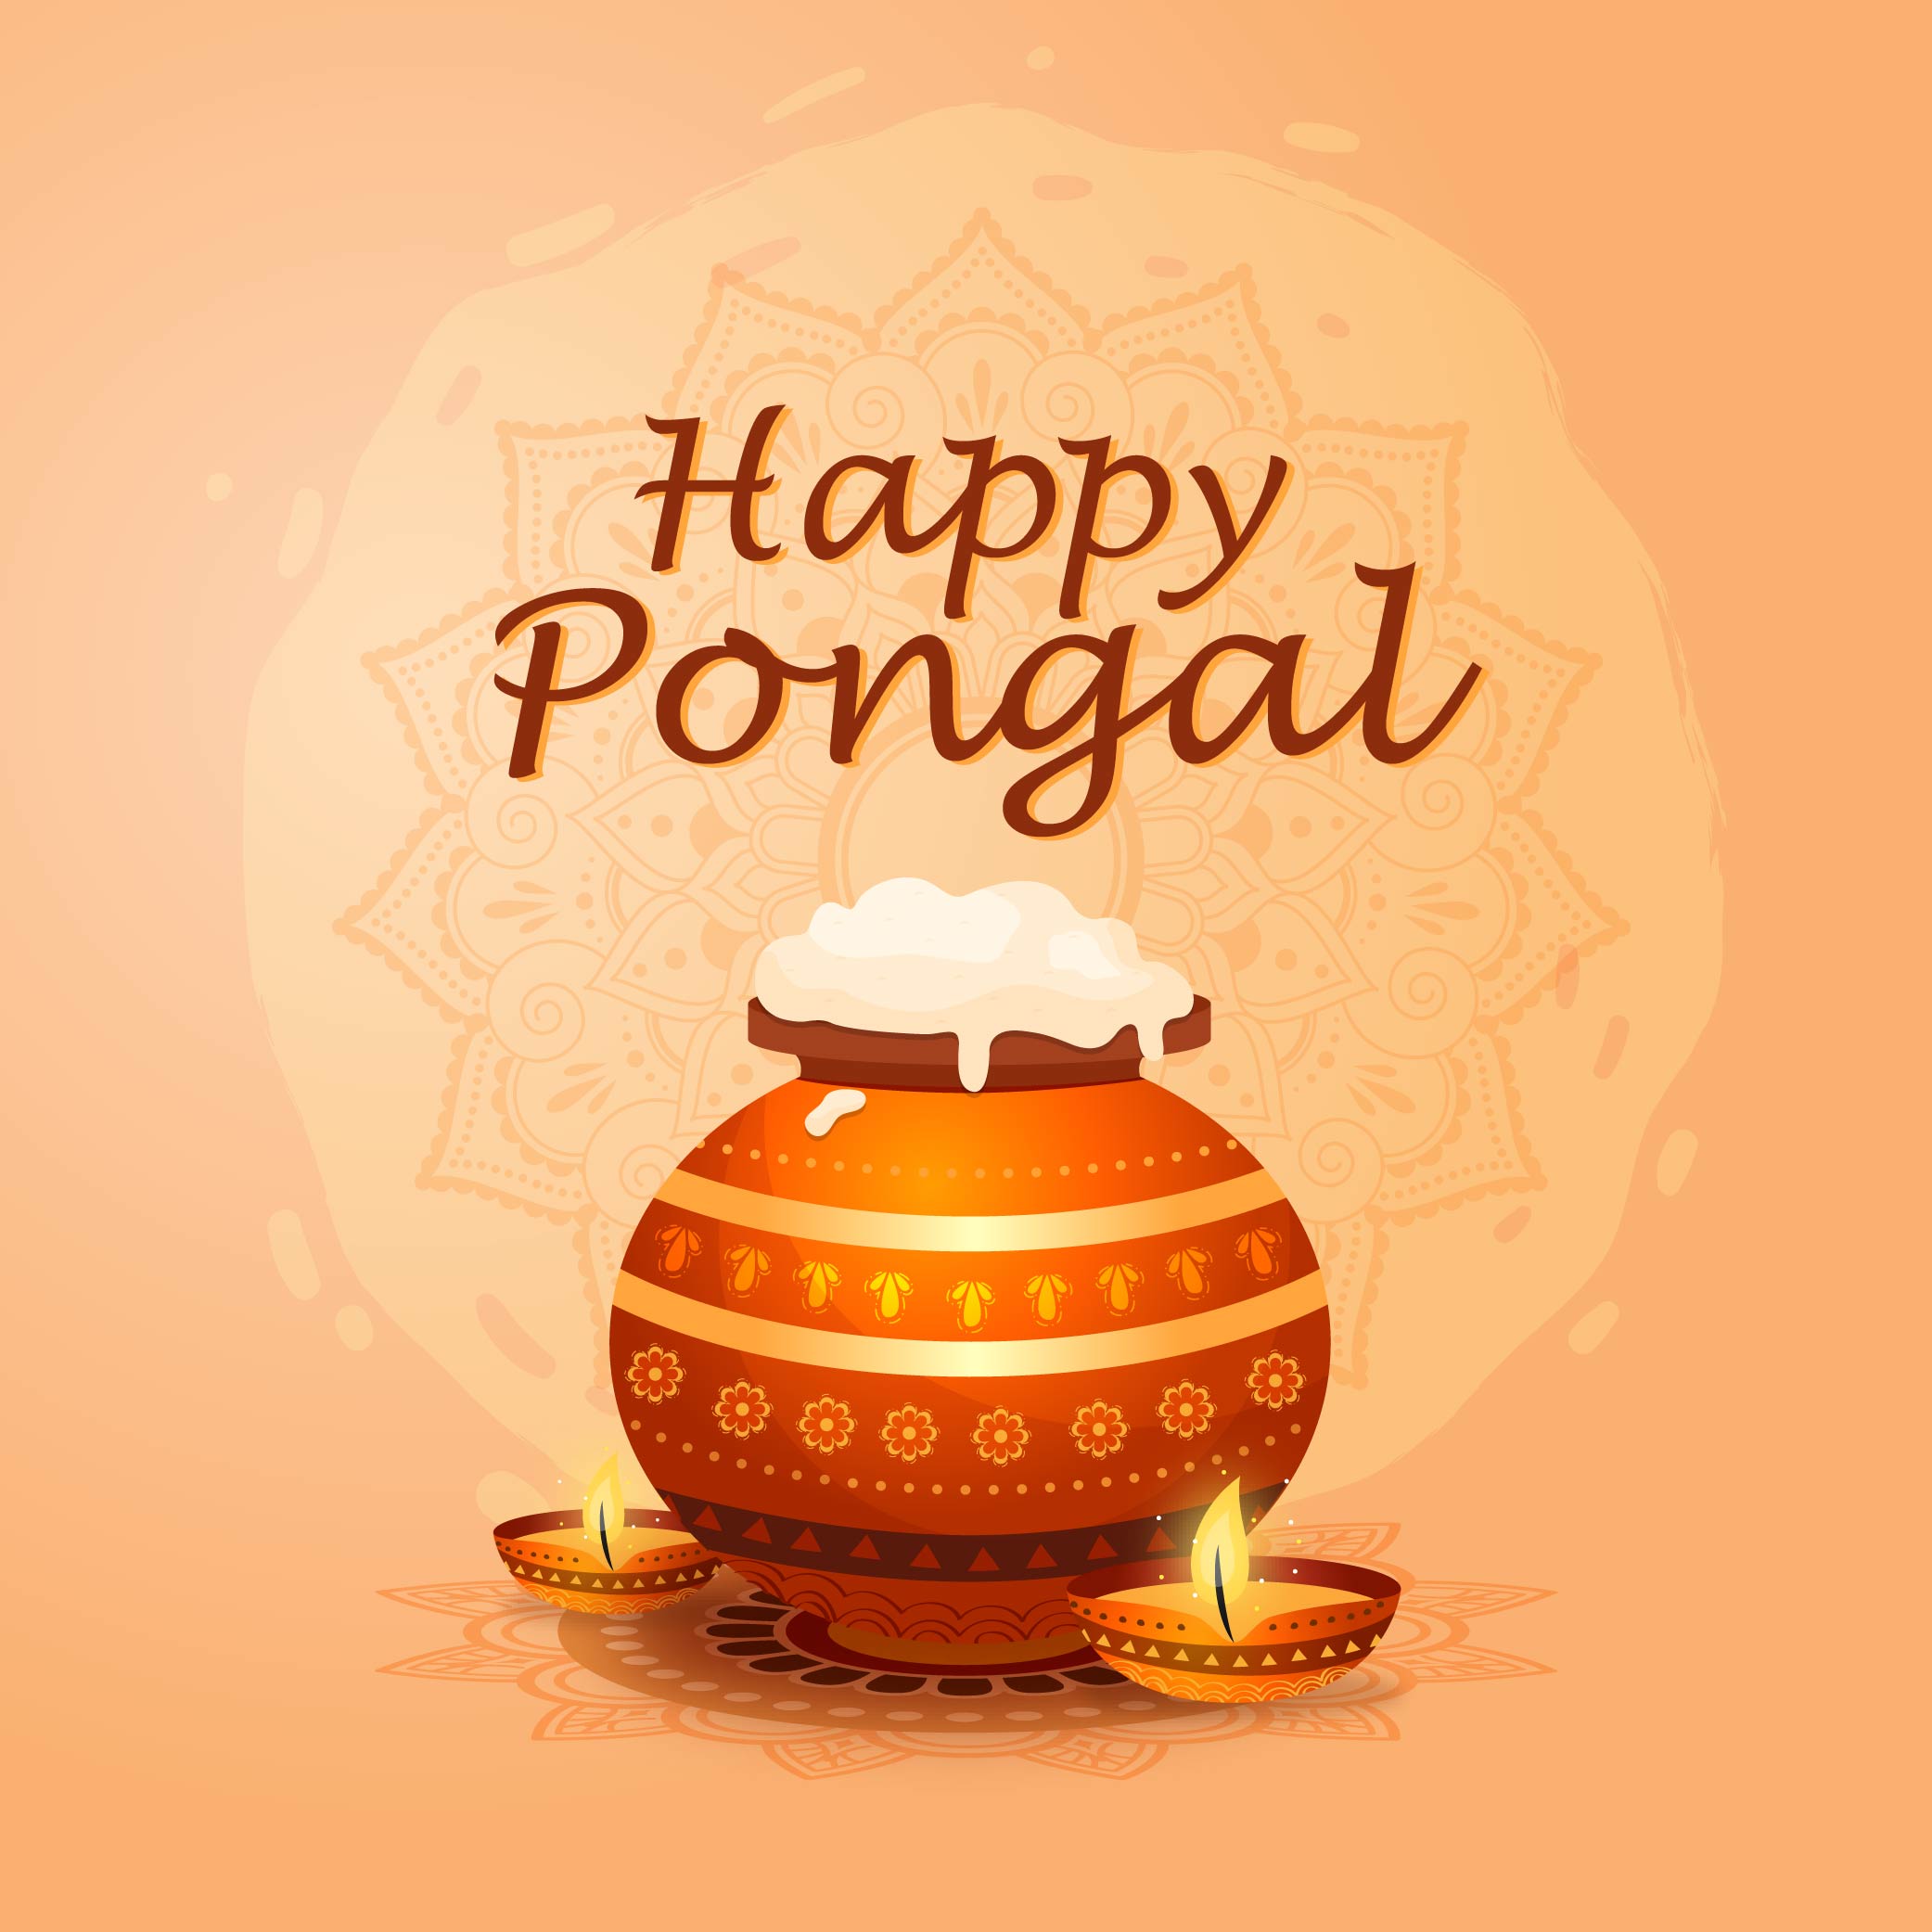 Happy pongal south indian harvesting festival greeting card background  illustration - free vector - Graphics Pic